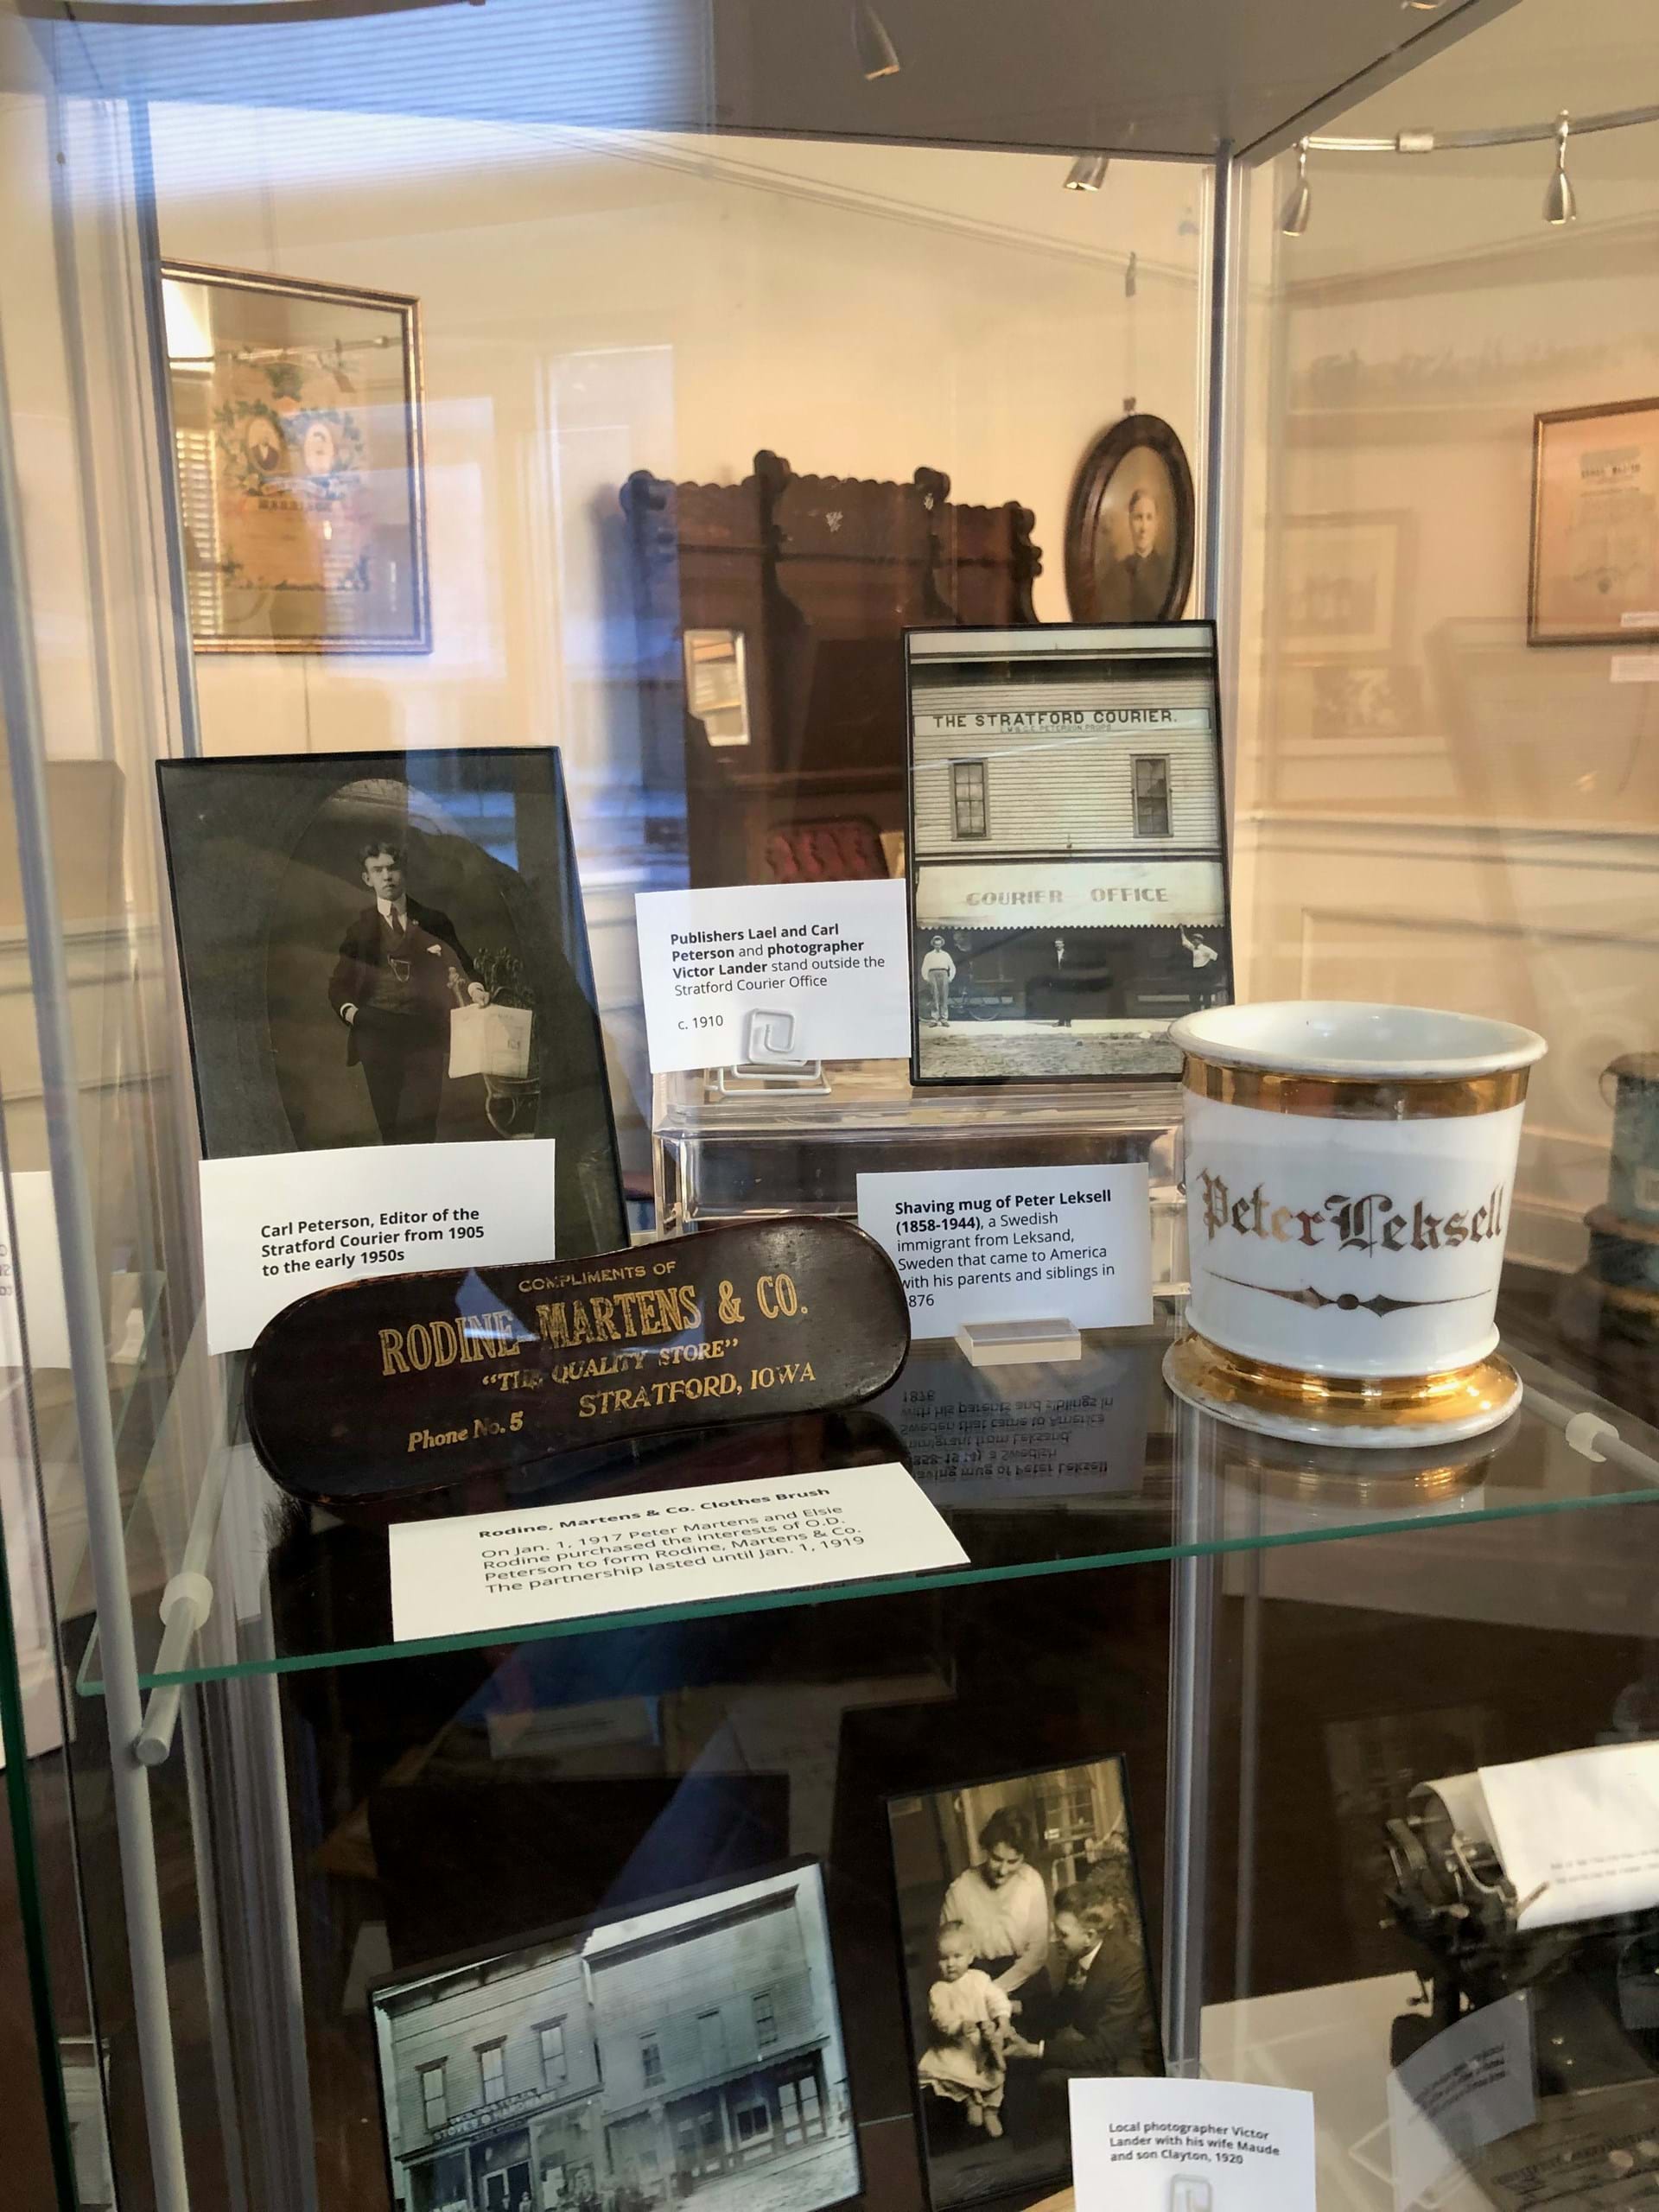 Artifacts highlighting various early businesses in Stratford, Iowa